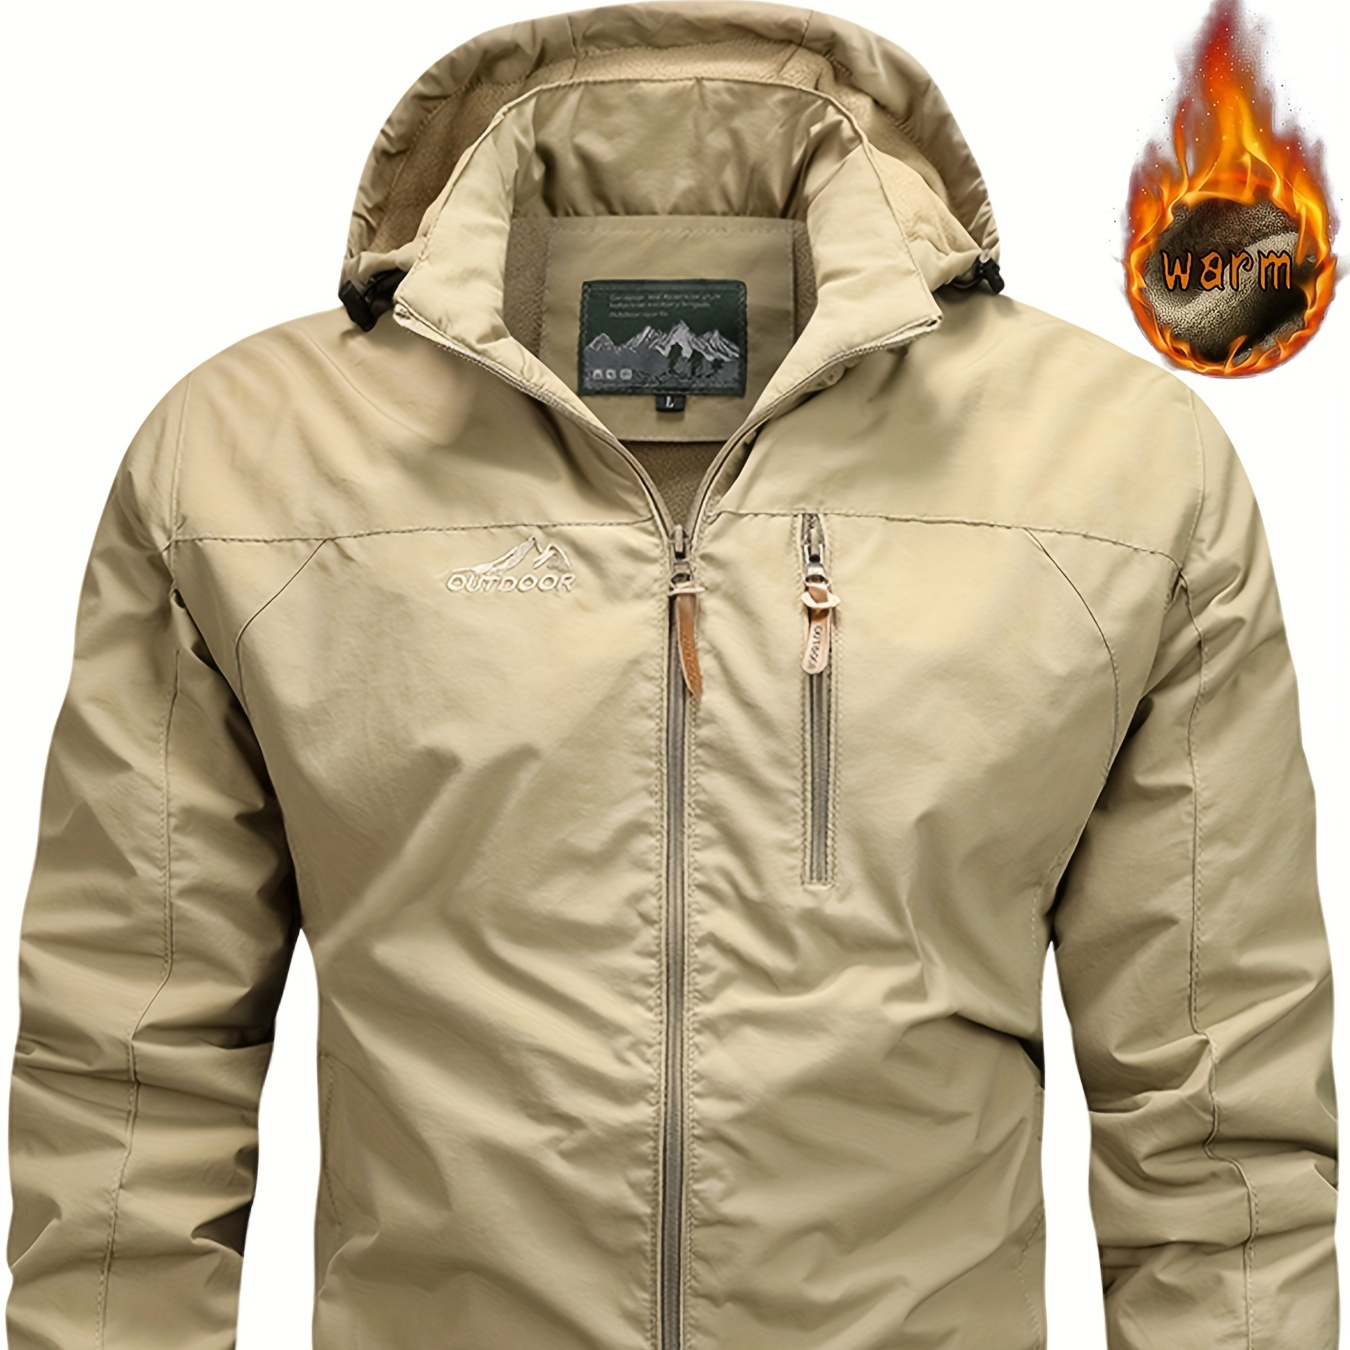 

Men's Warm Thick Hooded Windbreaker Jacket, Casual Jacket For Fall Winter Outdoor Activities